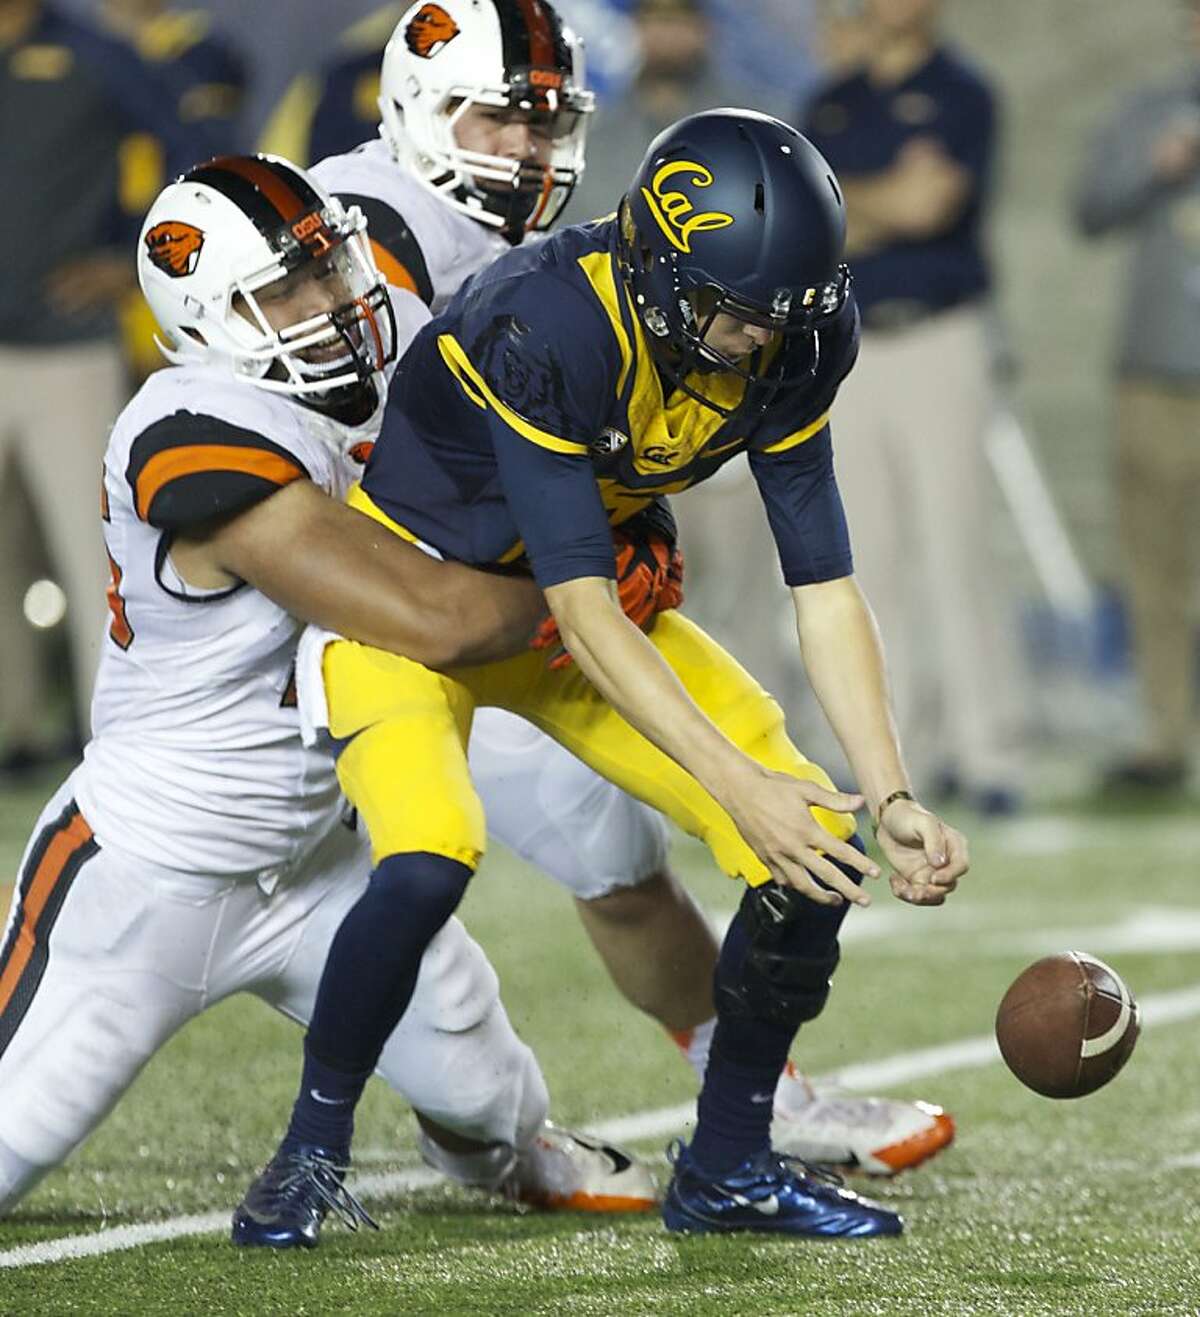 Oregon State Beavers defensive end Scott Crichton (left) sacks California Golden Bears quarterback Jared Goff (16) to set up a Beaver touchdown as defensive tackle Mana Rosa (93) recovered the ball against the California Golden Bears at California Memorial Stadium of the University of California, Berkeley Saturday Oct. 19, 2013. (AP Photo/The Oregonian, Randy L. Rasmussen)